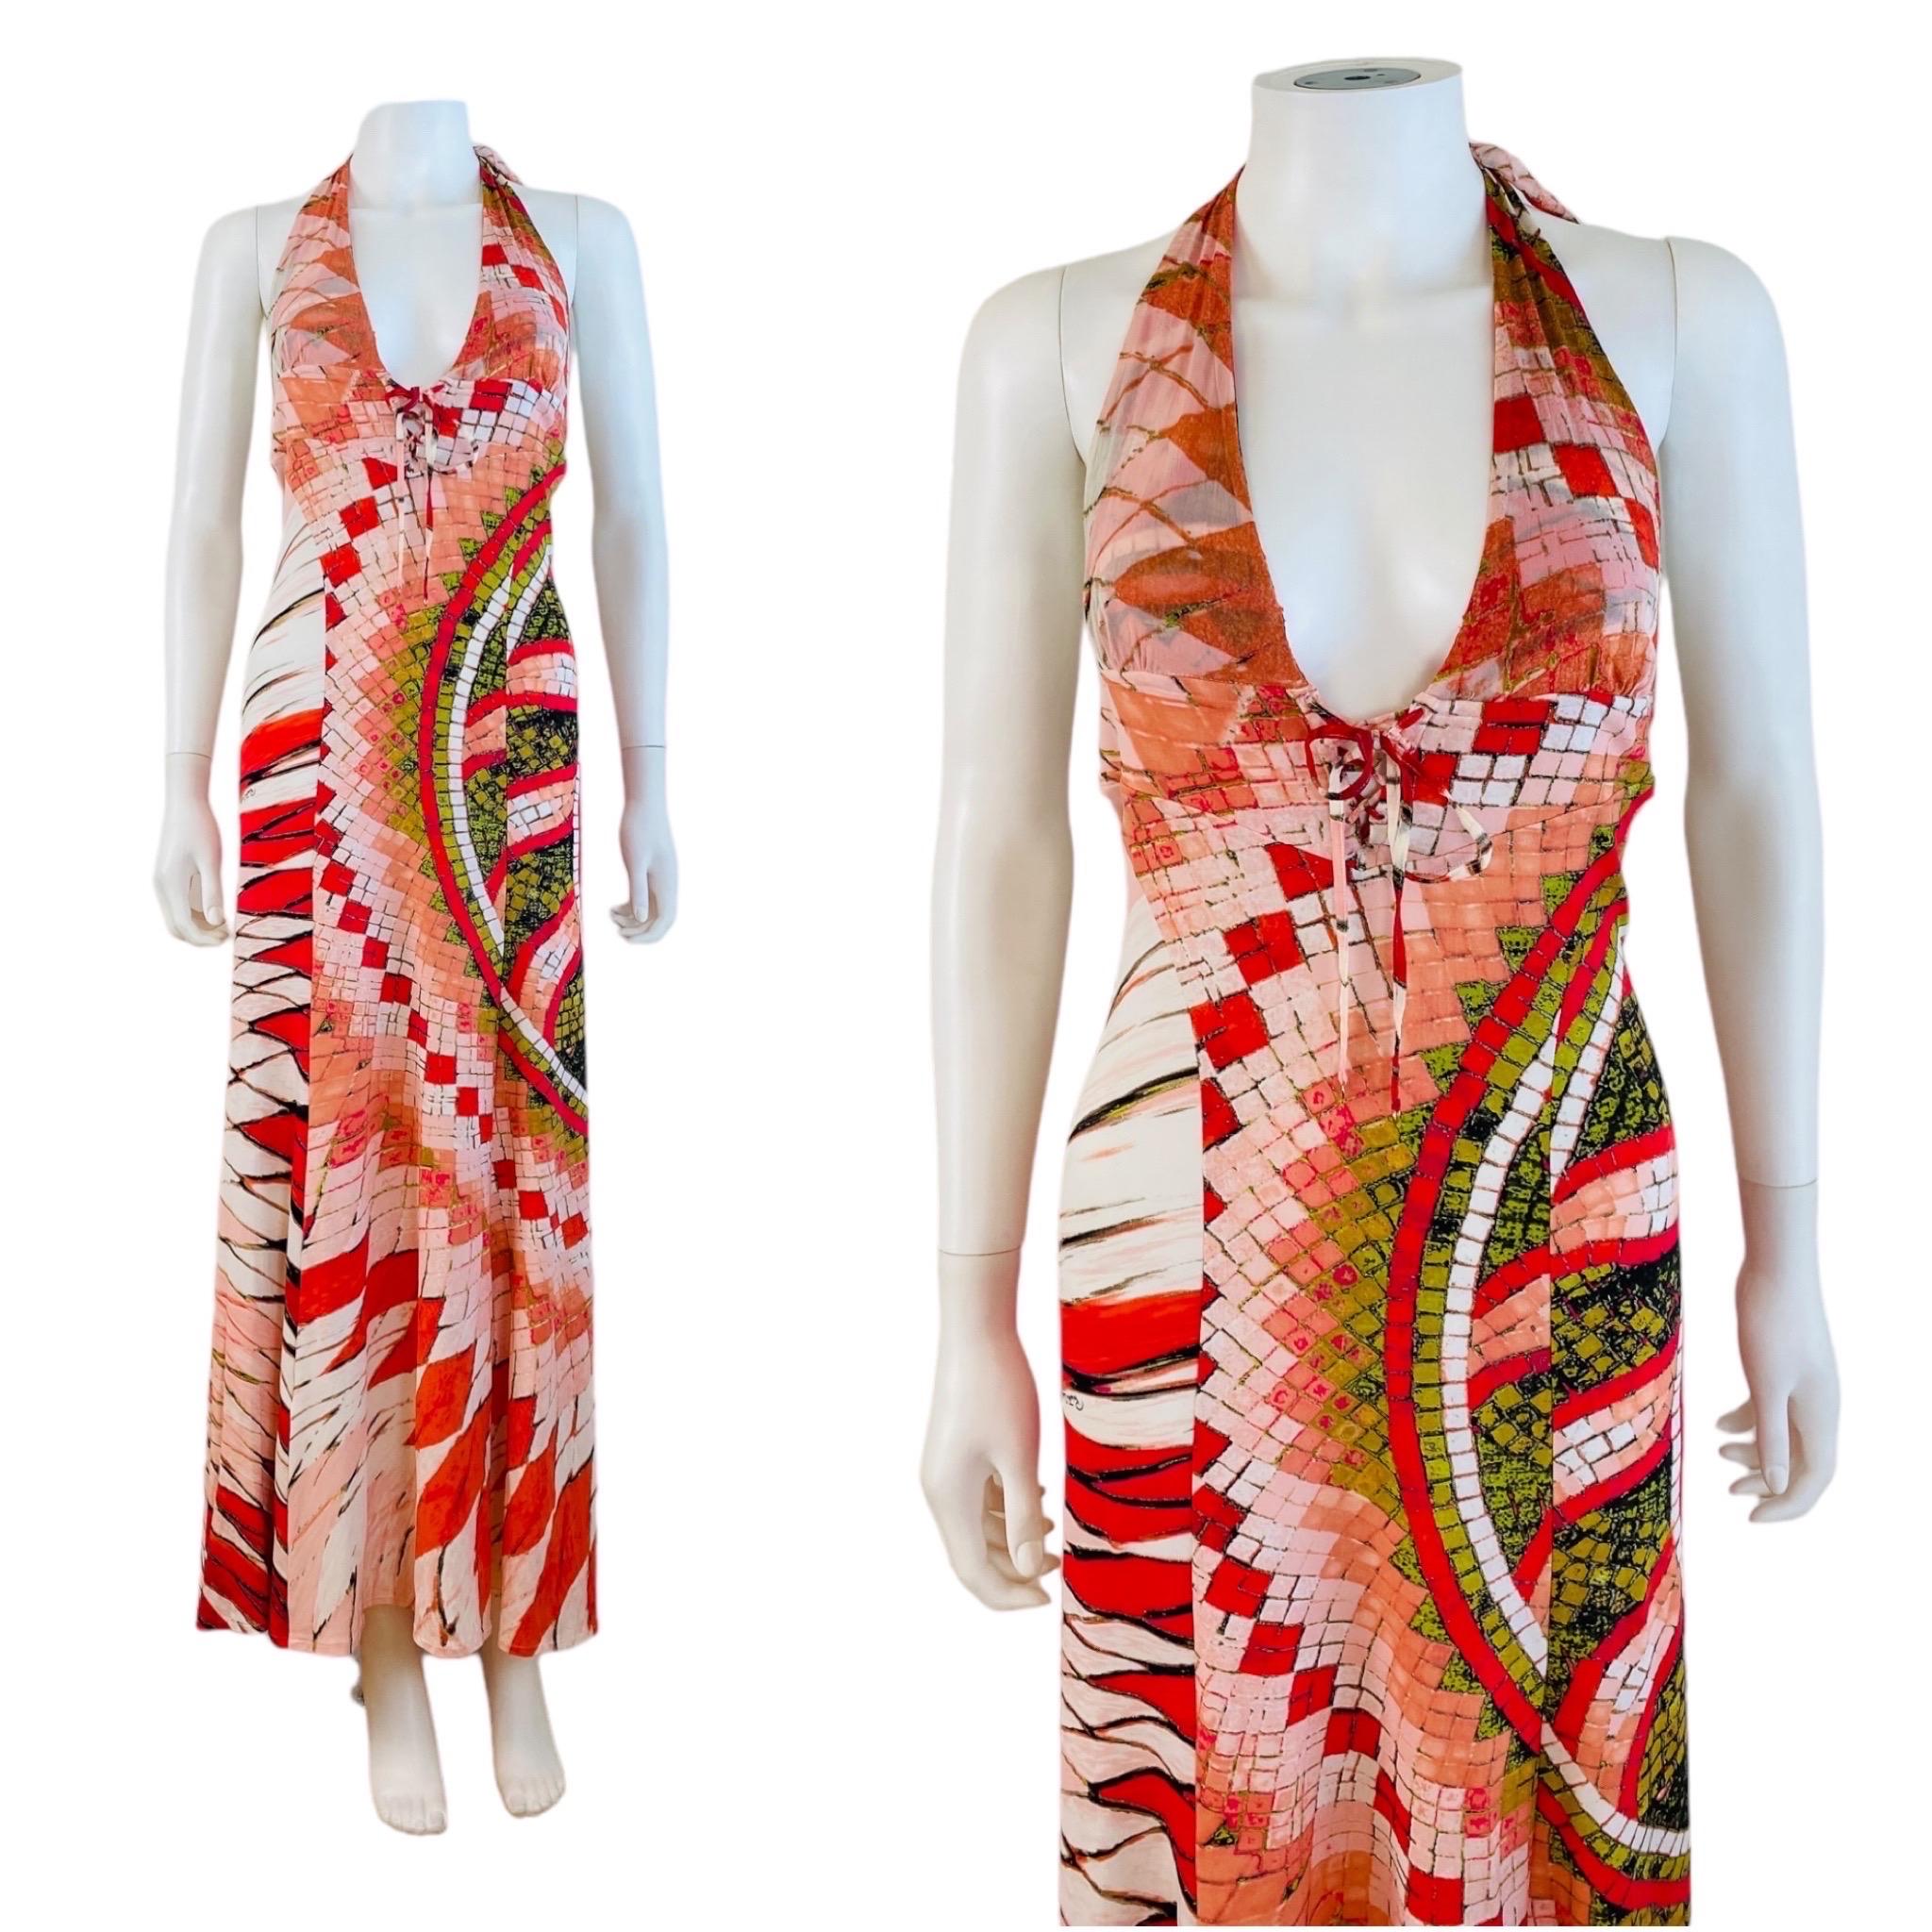 Vintage 2005 Roberto Cavalli Dress
Orange + coral abstract geometric print
Silk chiffon fabric overlay on the bust, stretch fabric throughout
Metallic gold pain accents
Deep V neckline with lace up detail at the bust
Ties behind the neck
Fitted